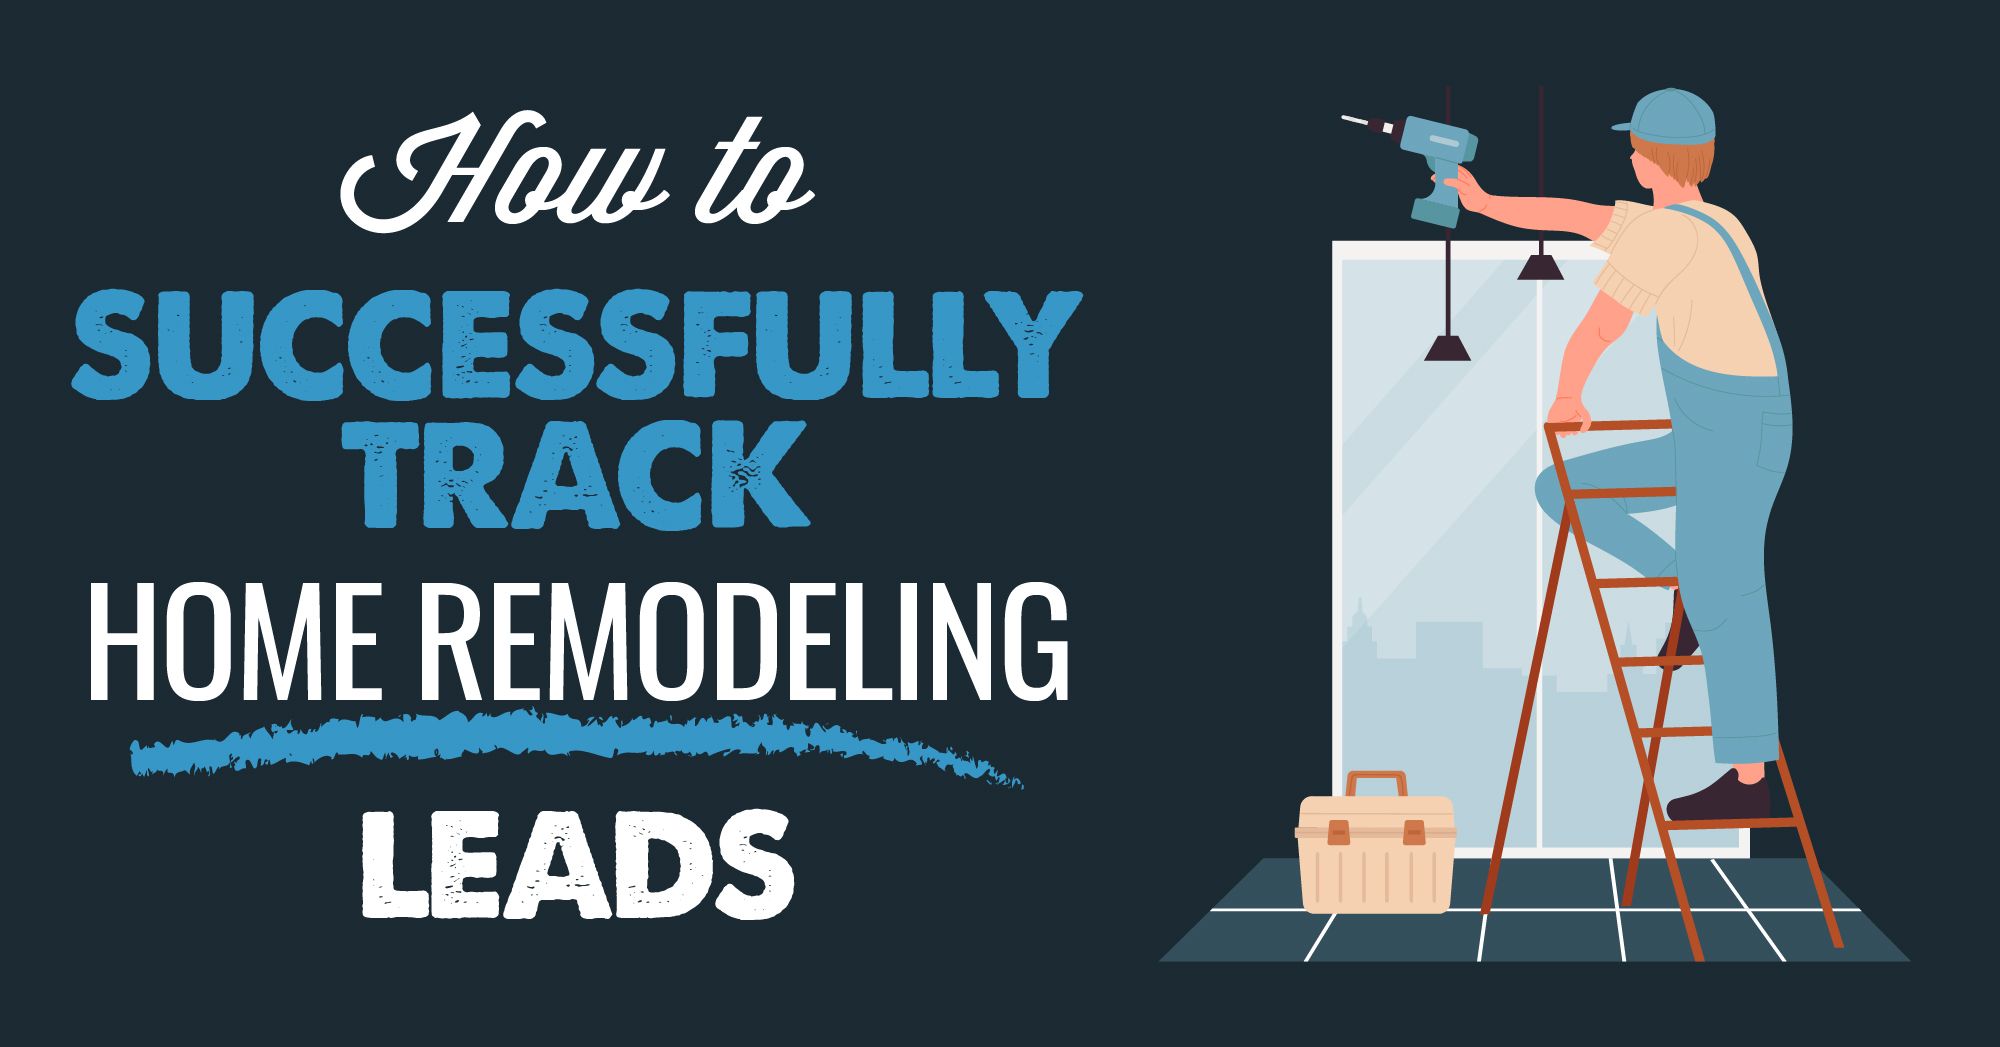 How to successfully track home remodeling leads